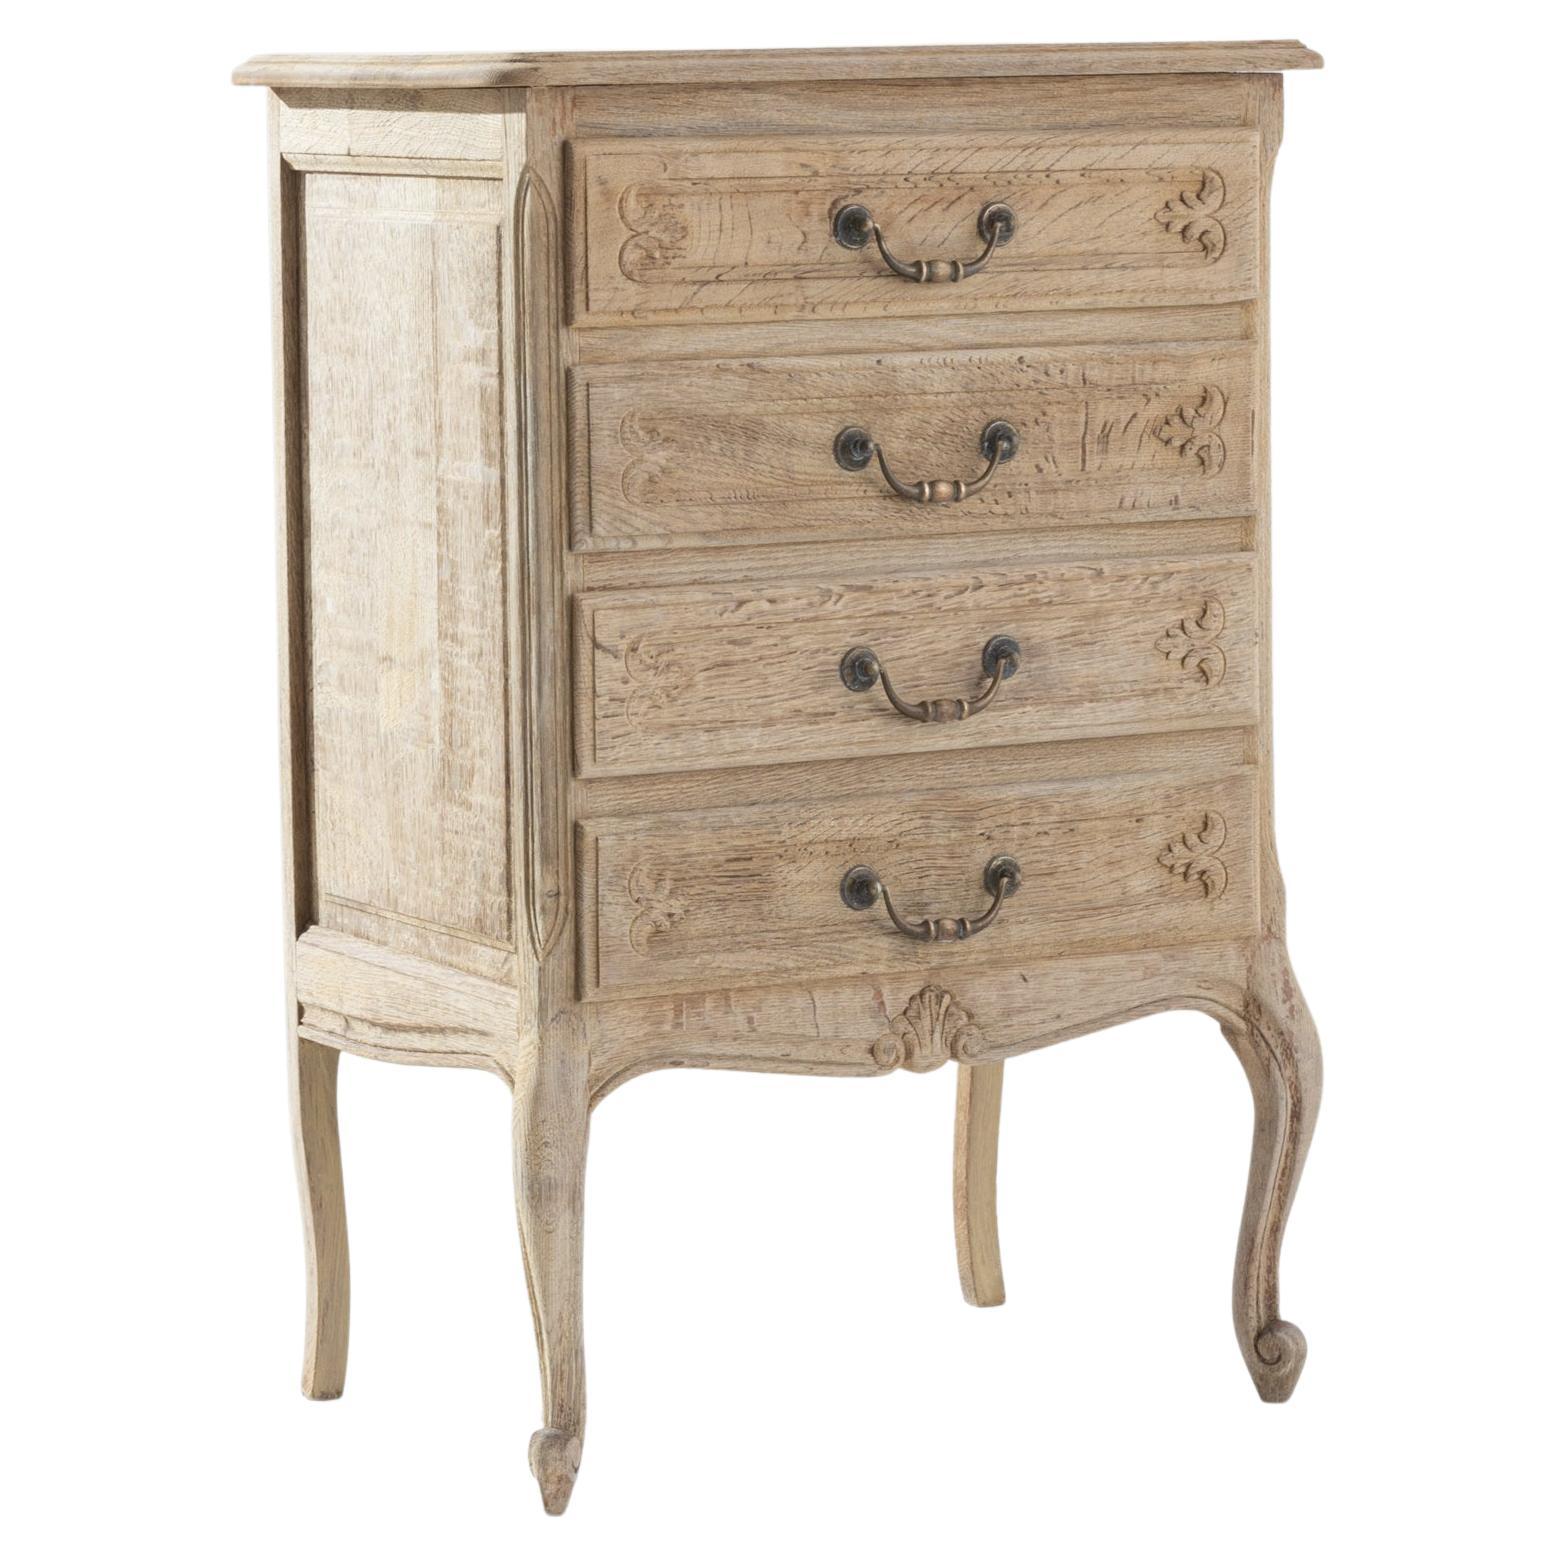 20th Century, French, Bleached Oak Chest of Drawers